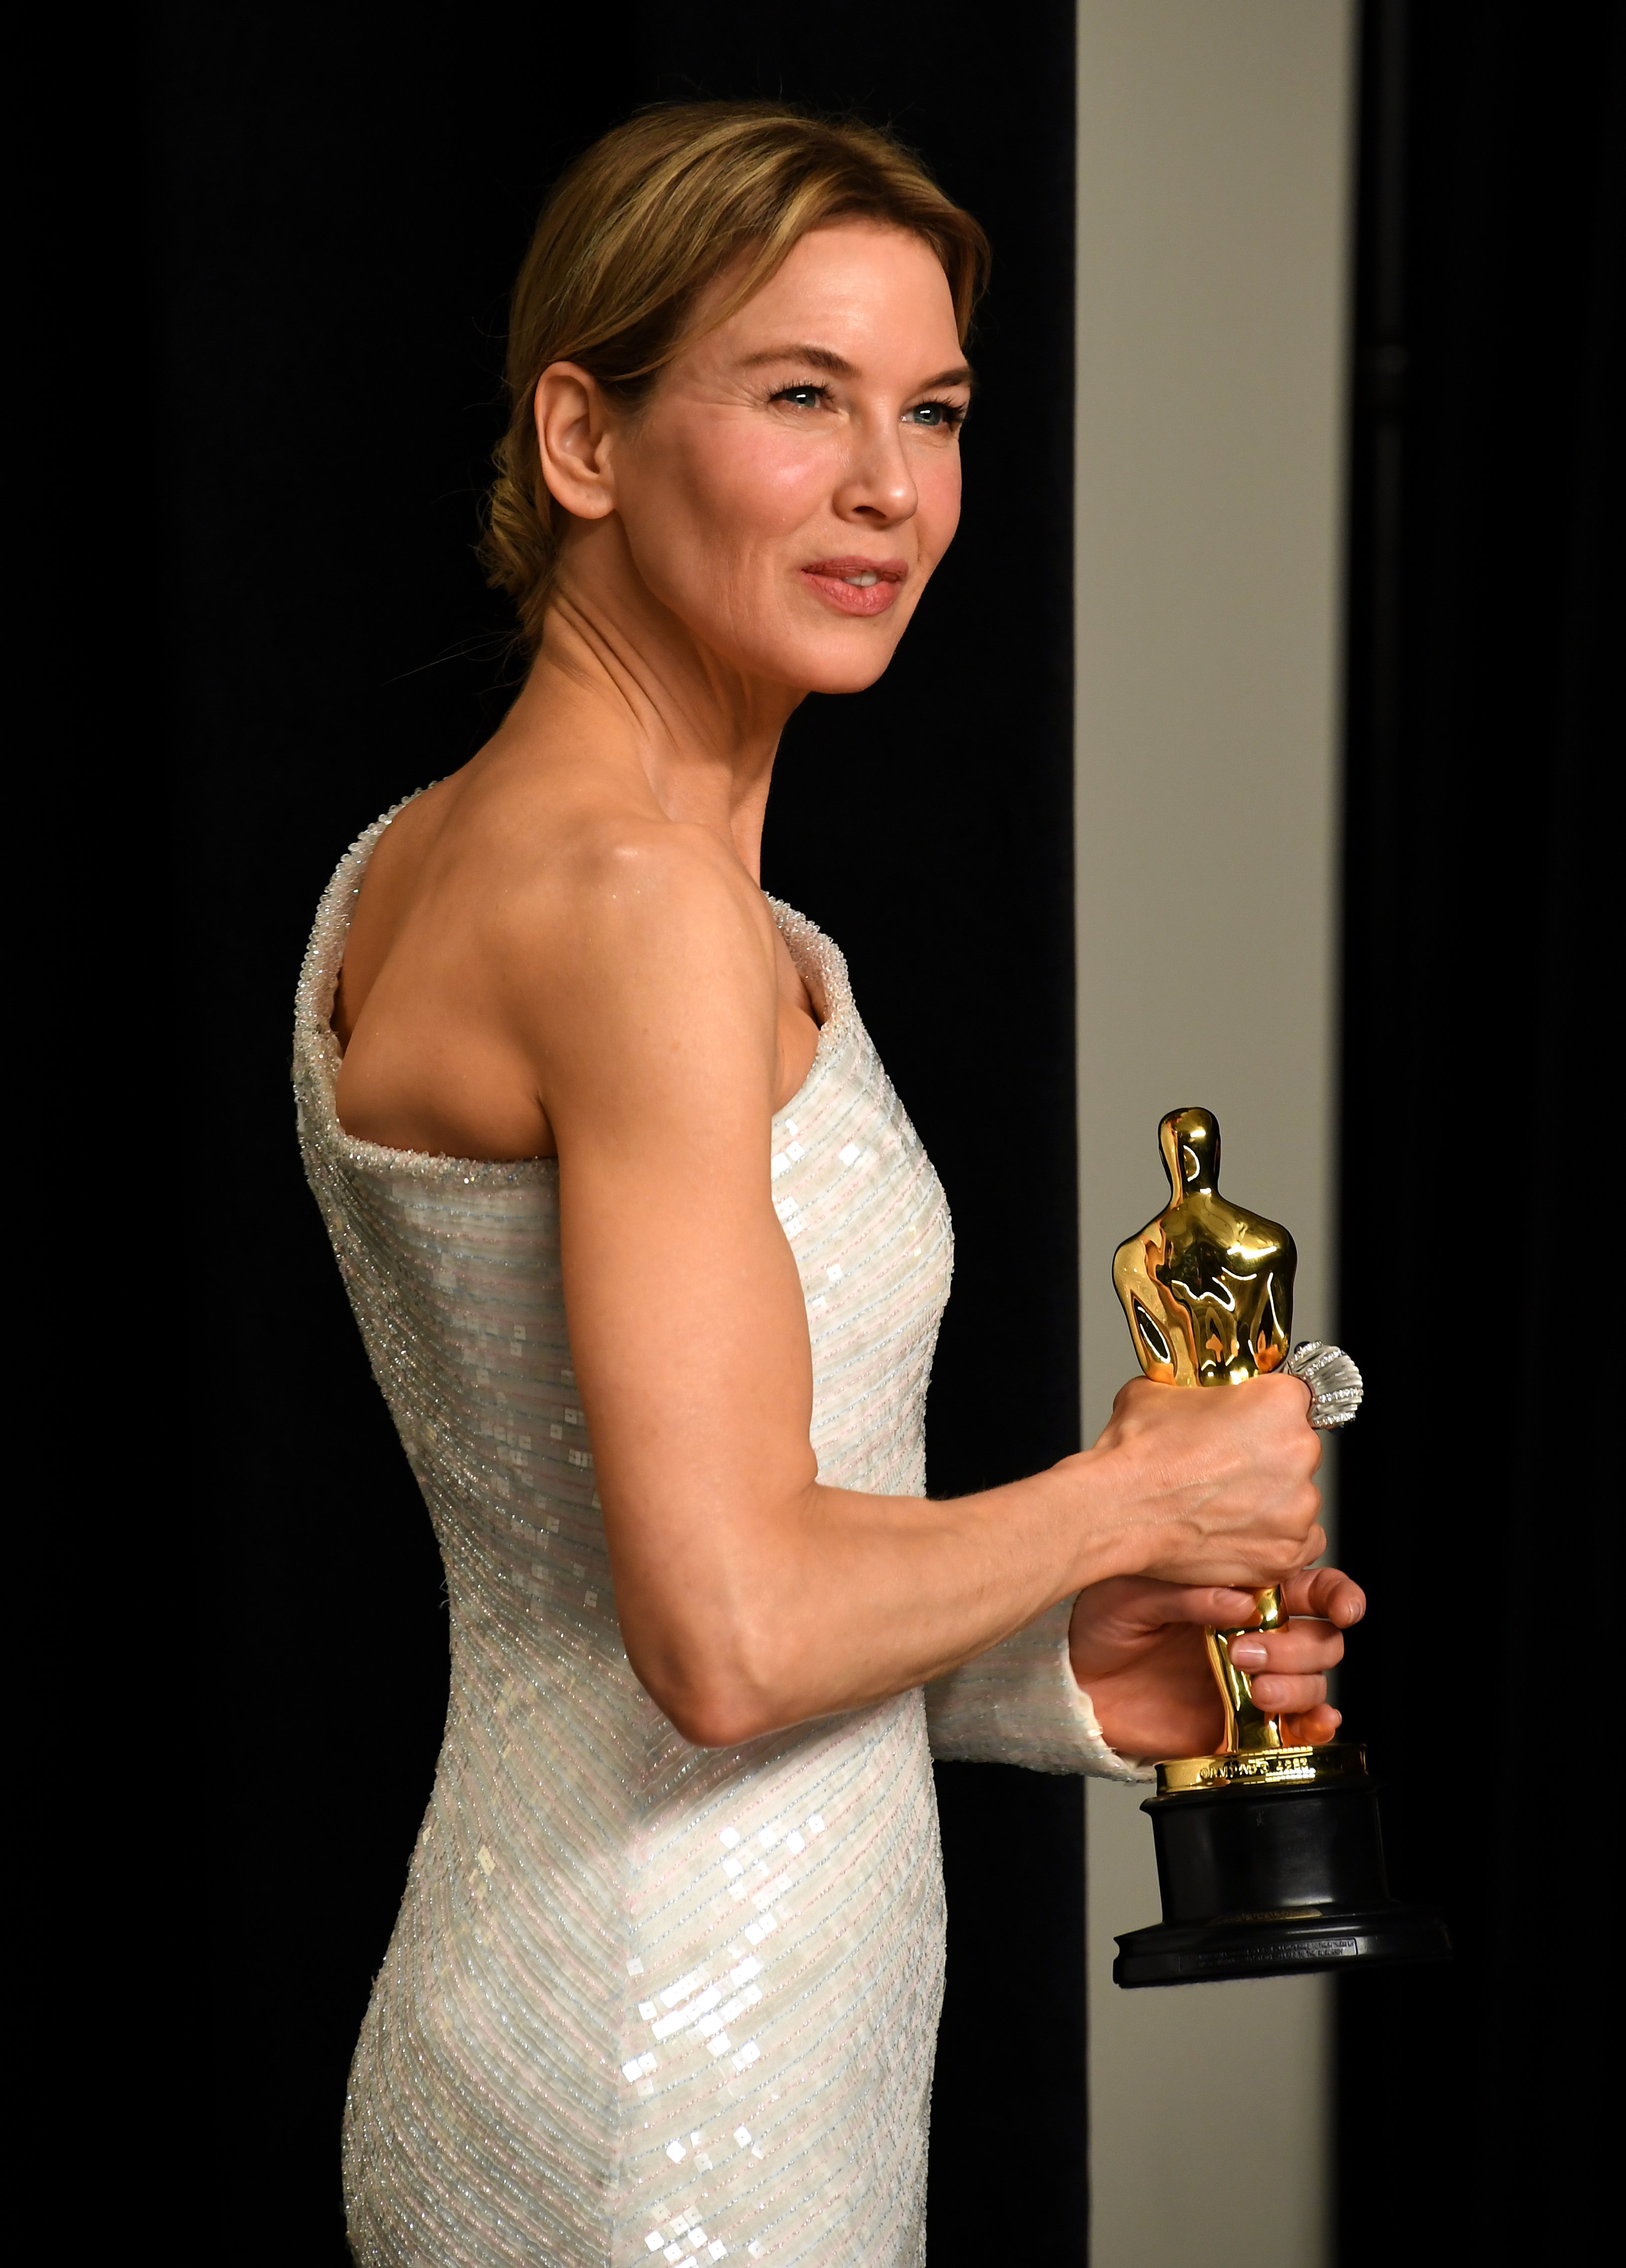 Renee Zellweger with her Best Actress Oscar in the press room at the 92nd Academy Awards held at the Dolby Theatre in Hollywood, Los Angeles | Photo: GettyImages